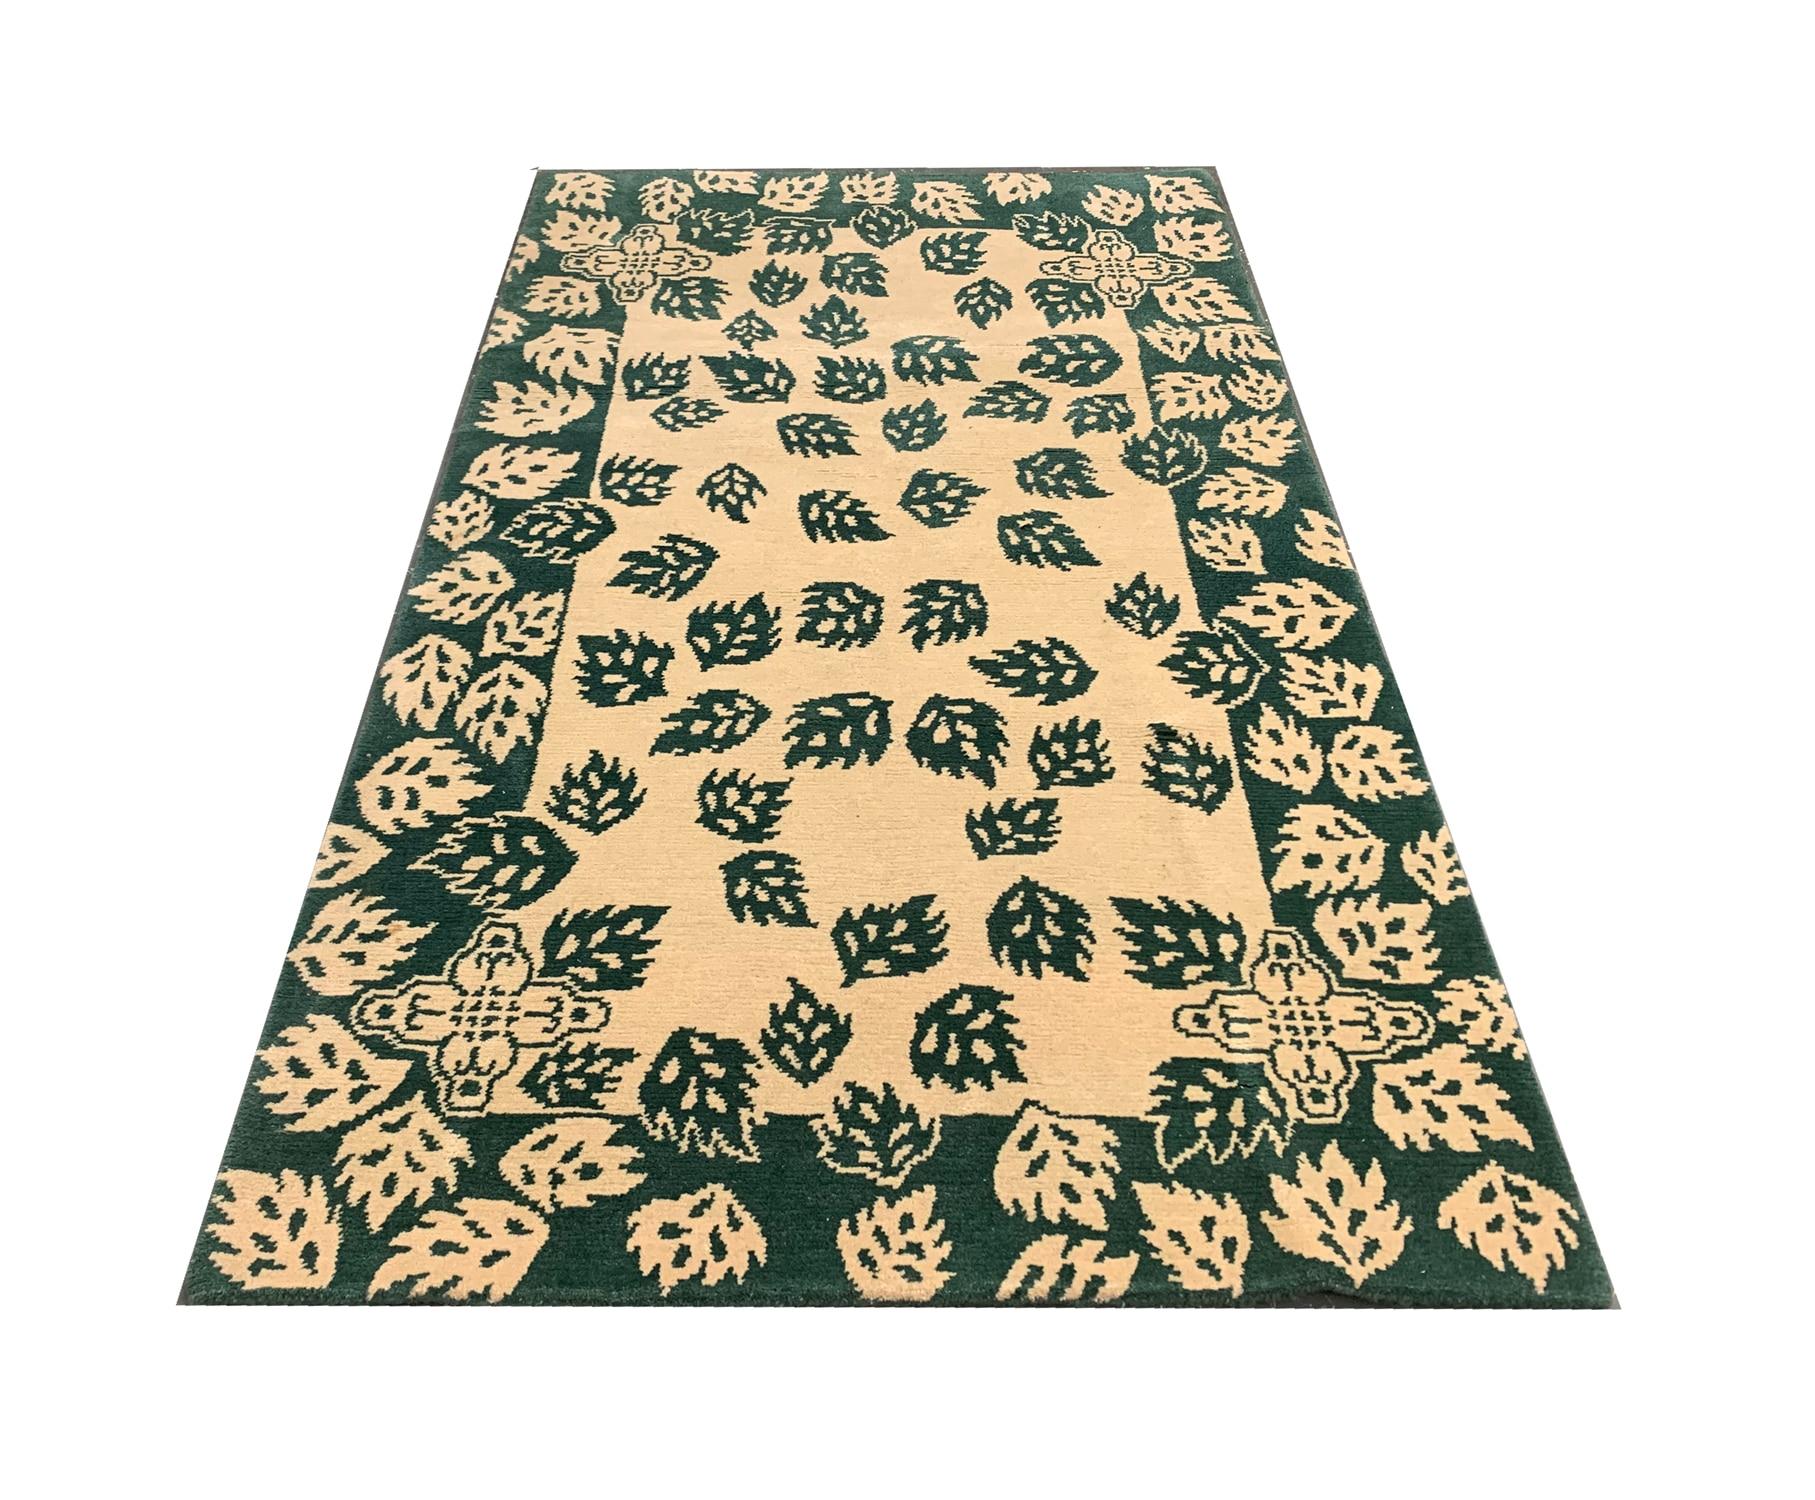 Introducing our exquisite Indian modern rug, adorned with a captivating green leaves pattern, perfect for adding a touch of nature's elegance to your living space. Hand-knotted with meticulous care, this vintage carpet boasts exceptional quality and